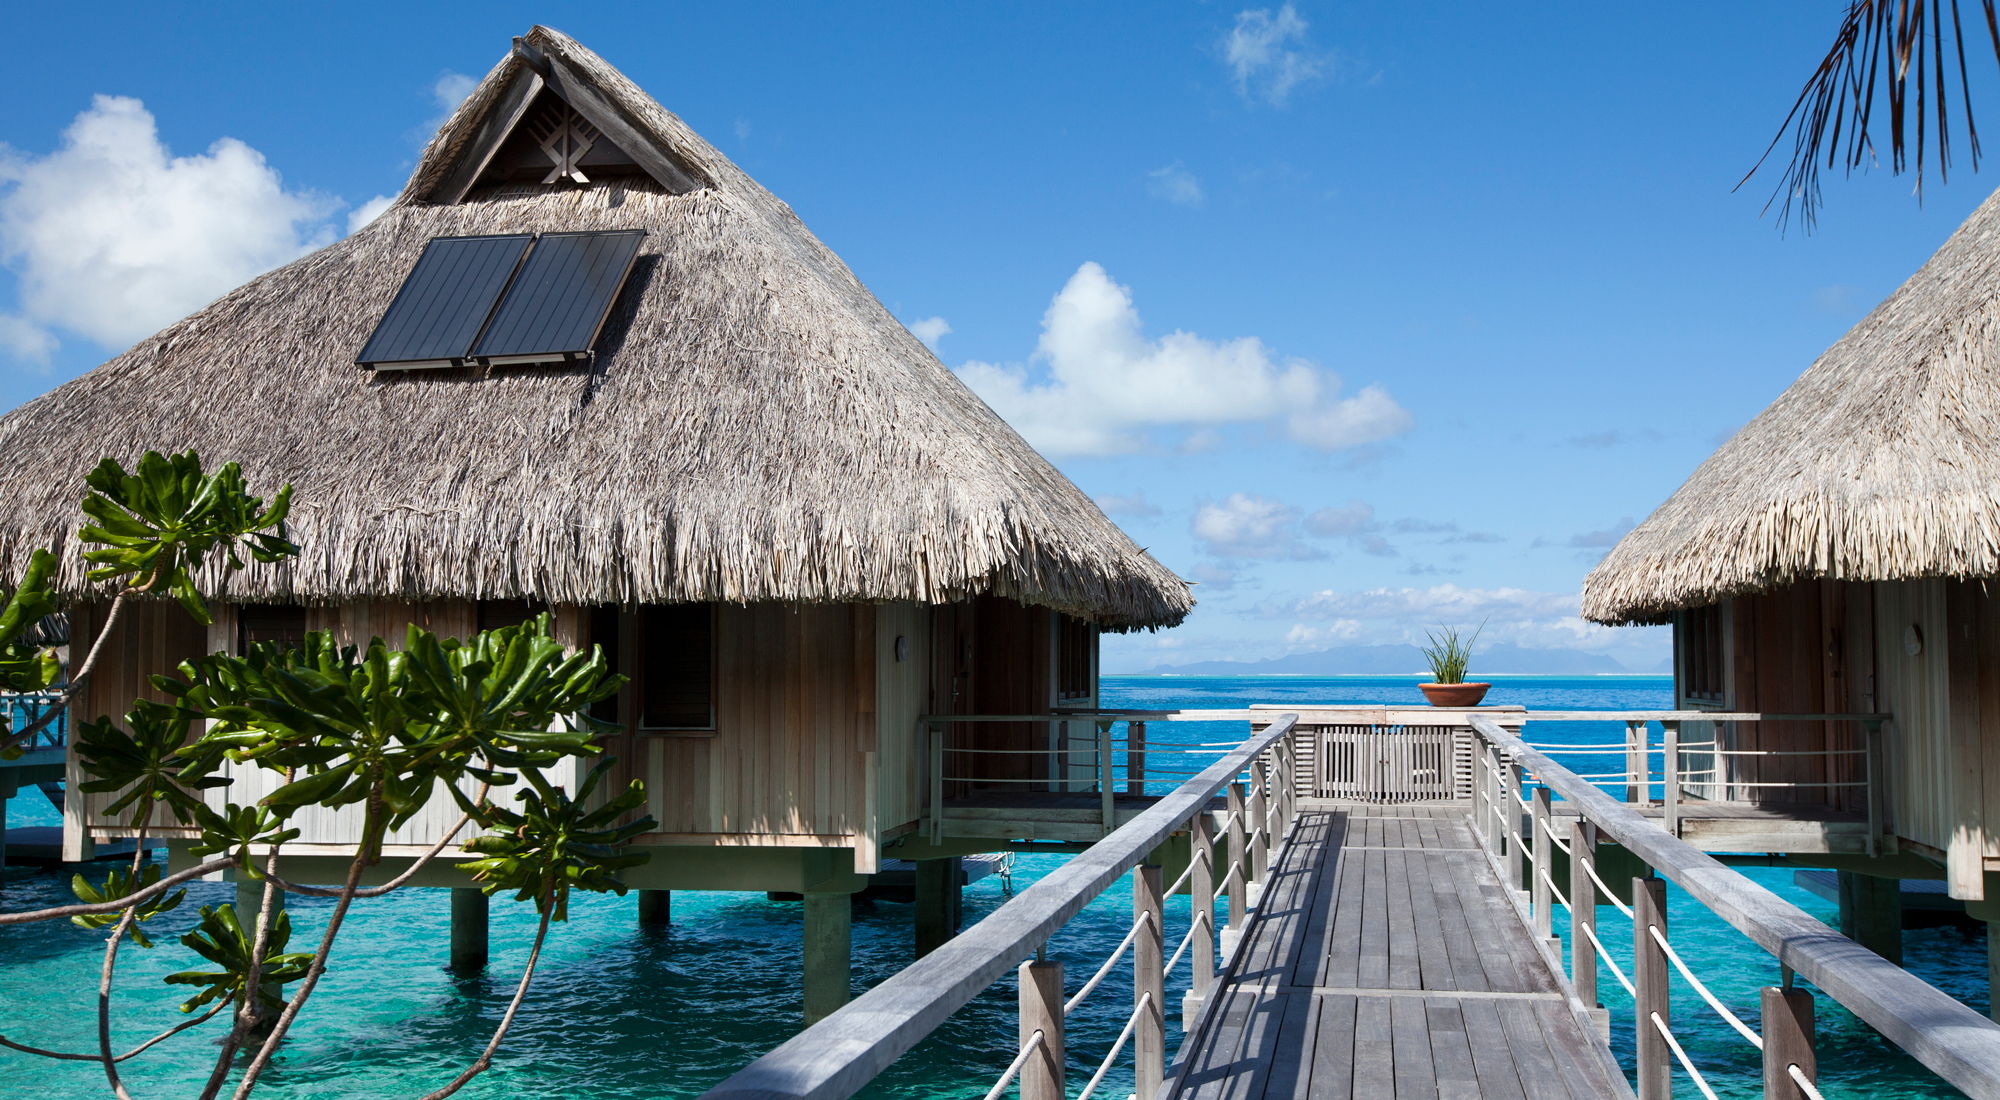 Eco-friendly sustainable bungalows with traditional thatched roofs built over the water in Polynesia, Tahiti